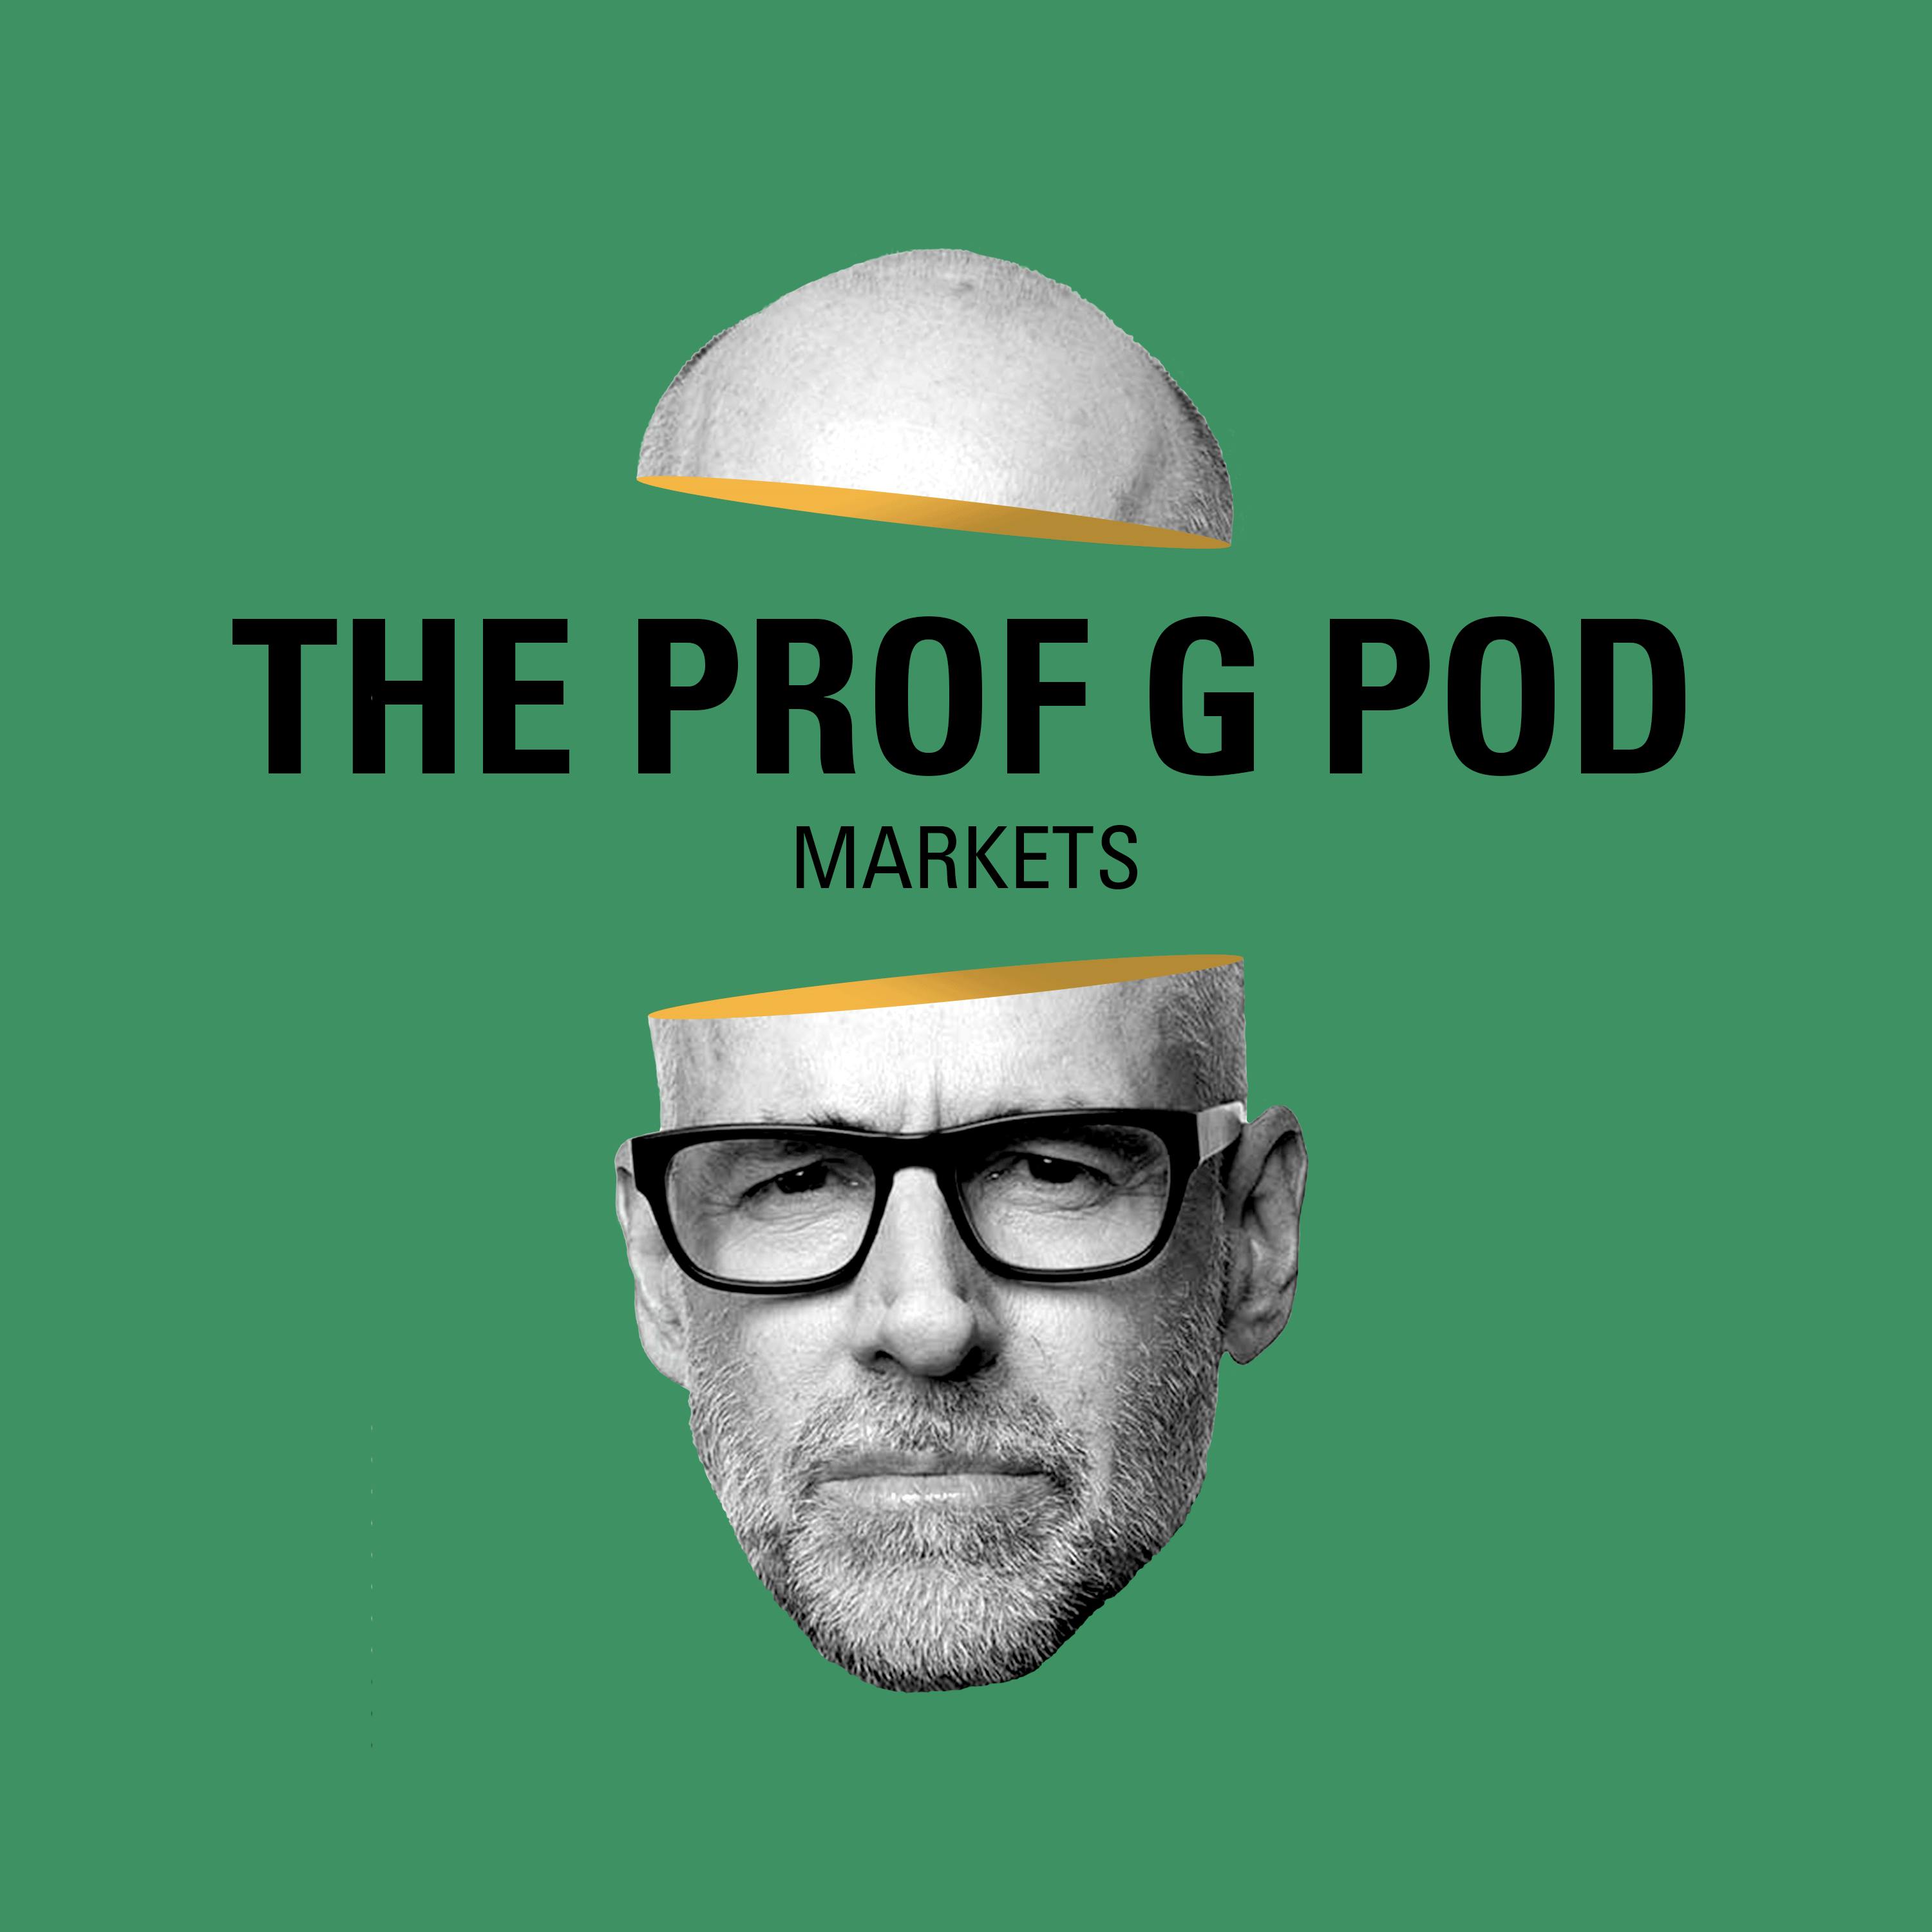 Prof G Markets: Apple's High Yield Savings Accounts, Shifting to Bonds, and AI vs. IP by Vox Media Podcast Network